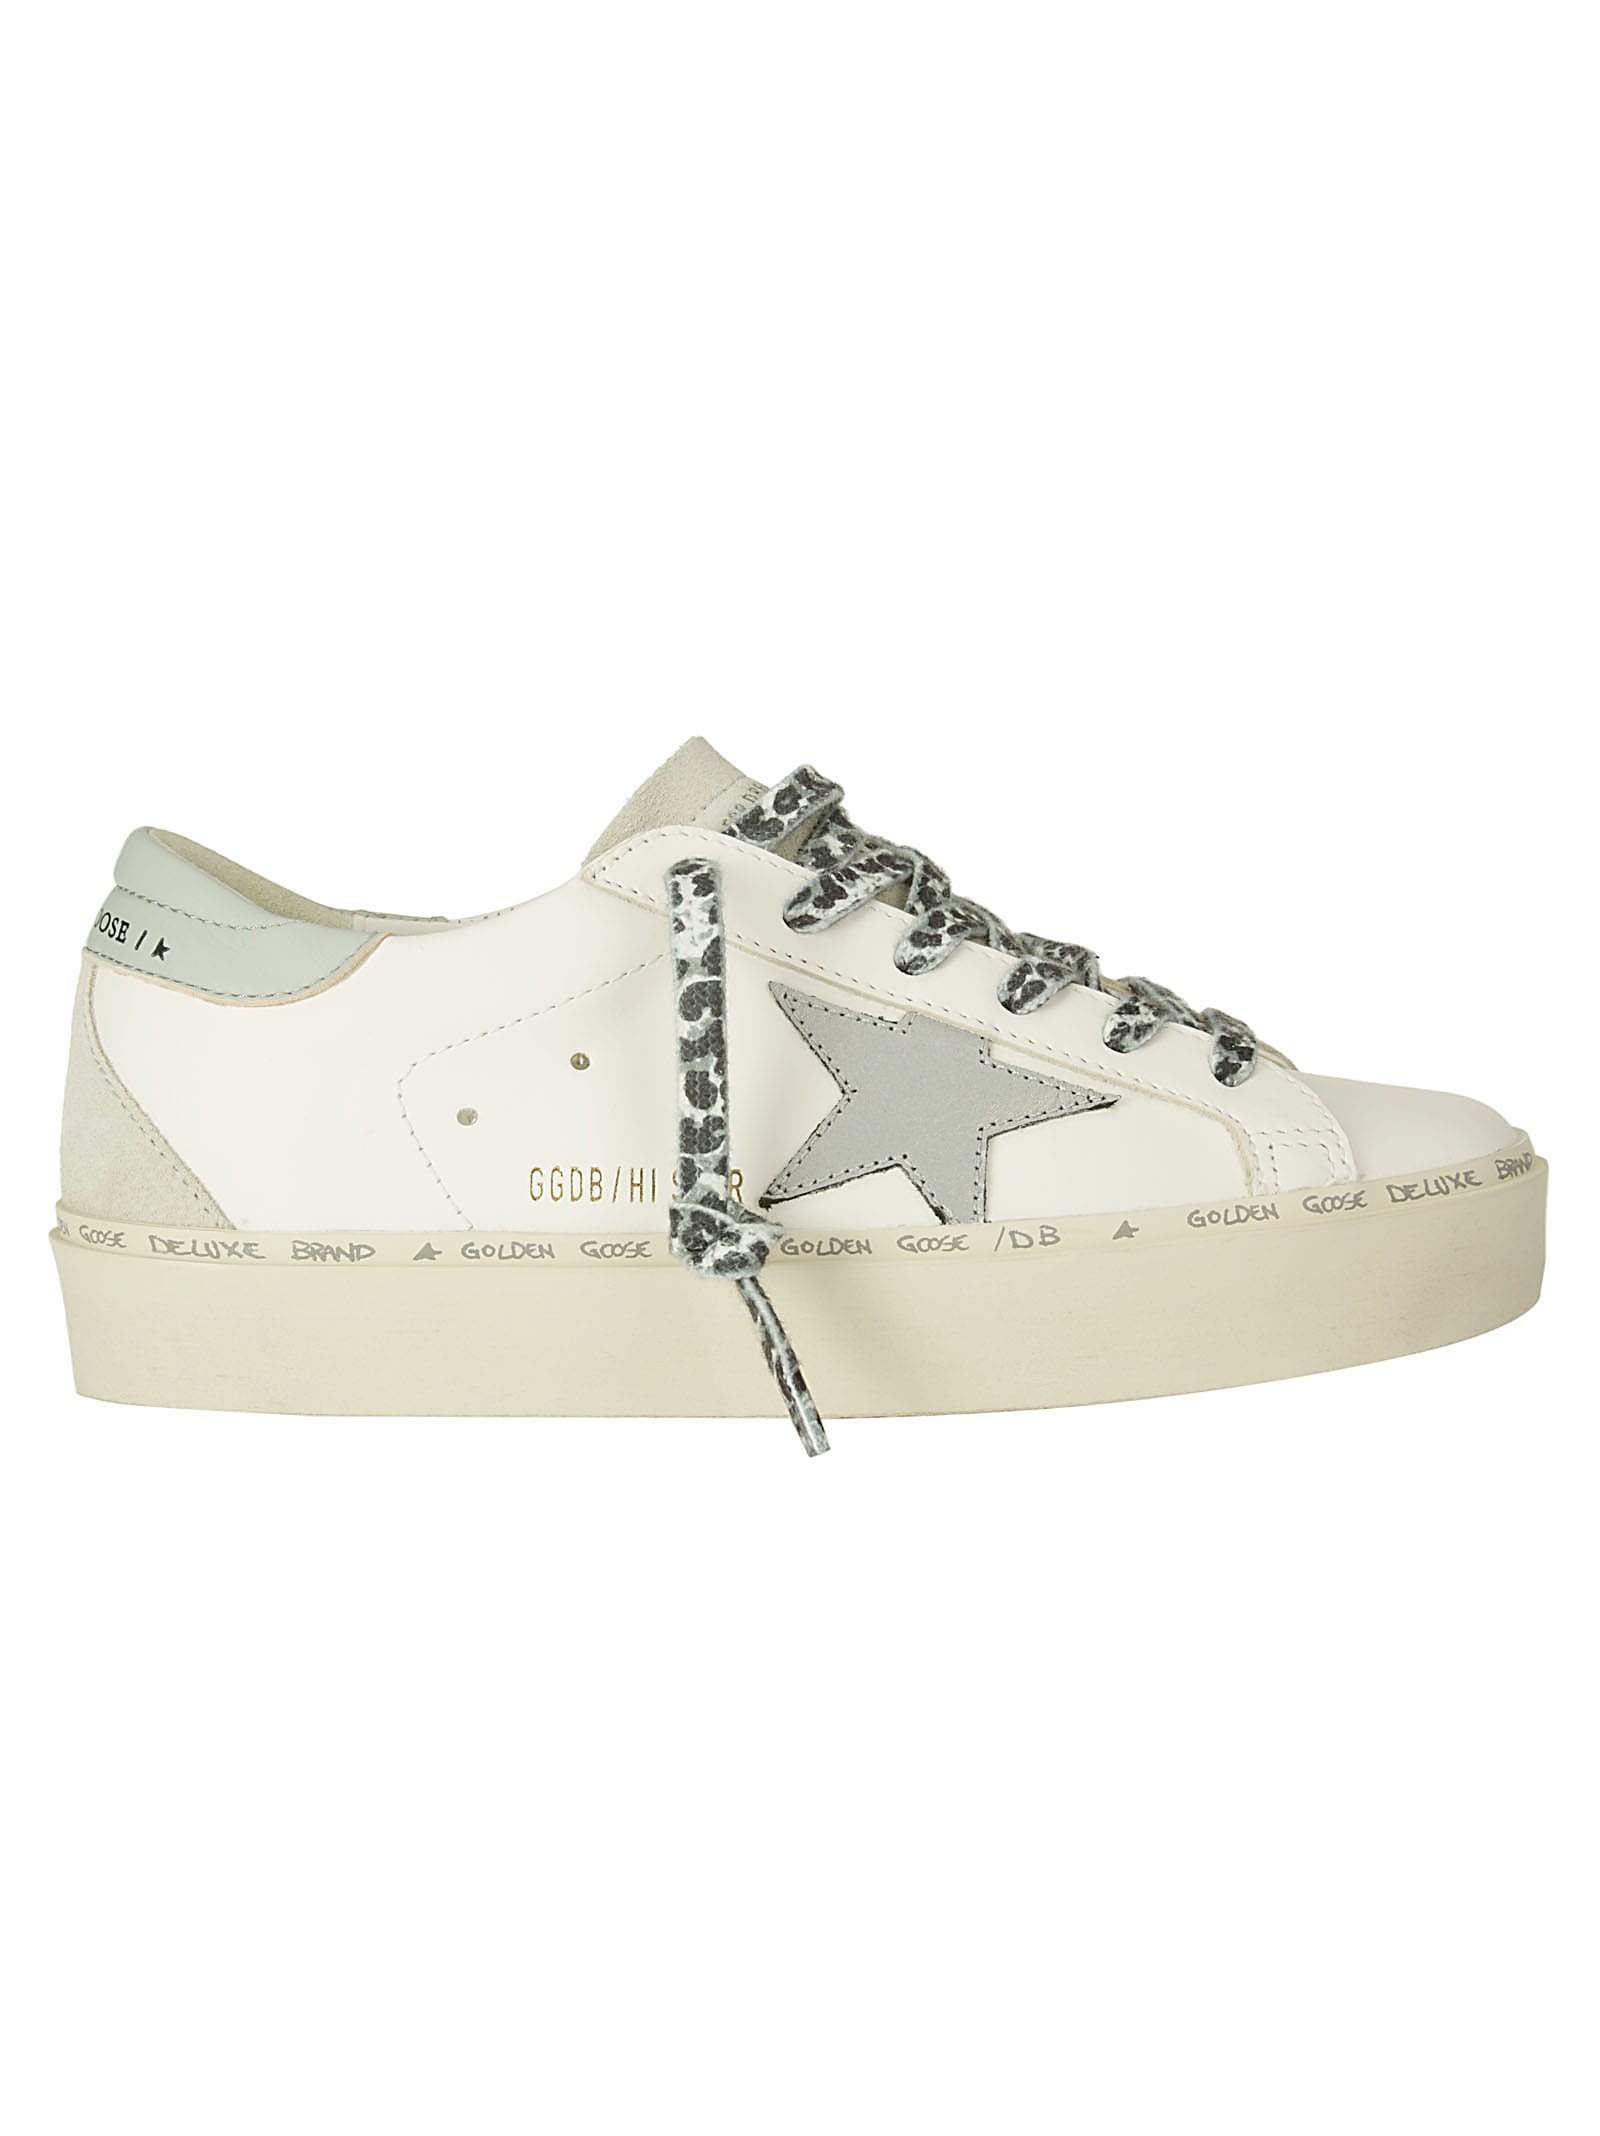 Golden Goose Hi Star Leather Upper And Star Nappa Heel Suede Sp In Optic White/gray Dawn/orchid Hush/aqua Grey/ice